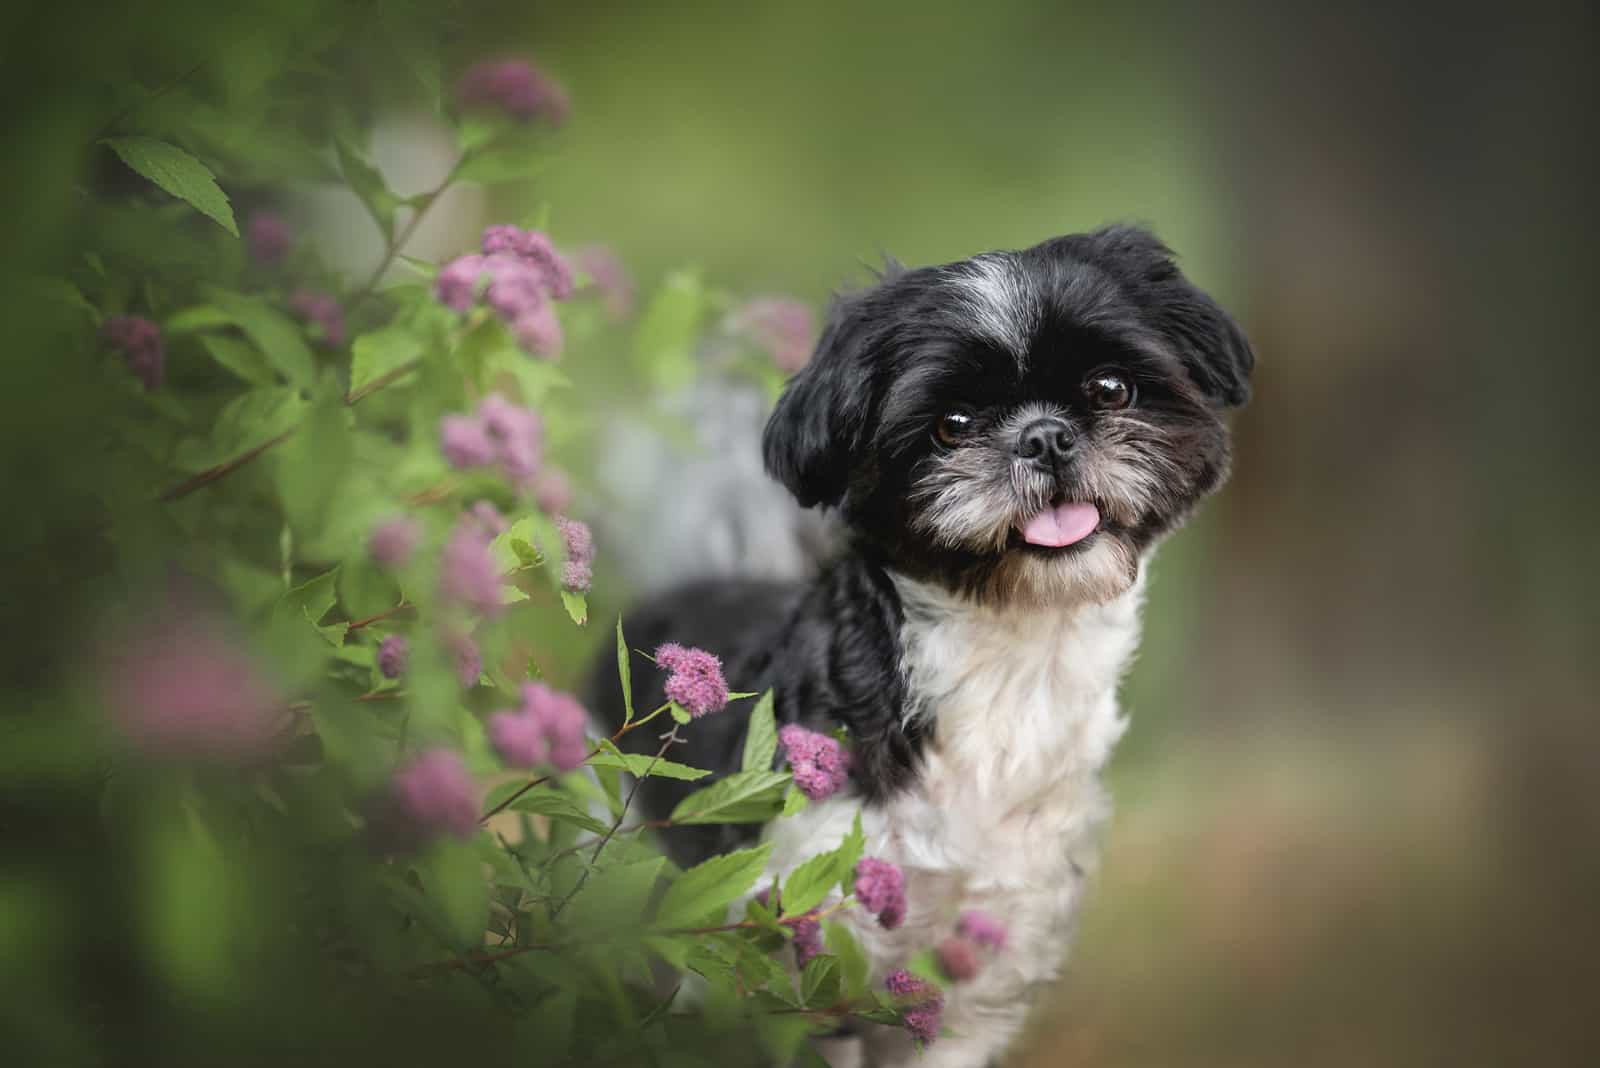 the adorable Shih Tzus stands in flowers